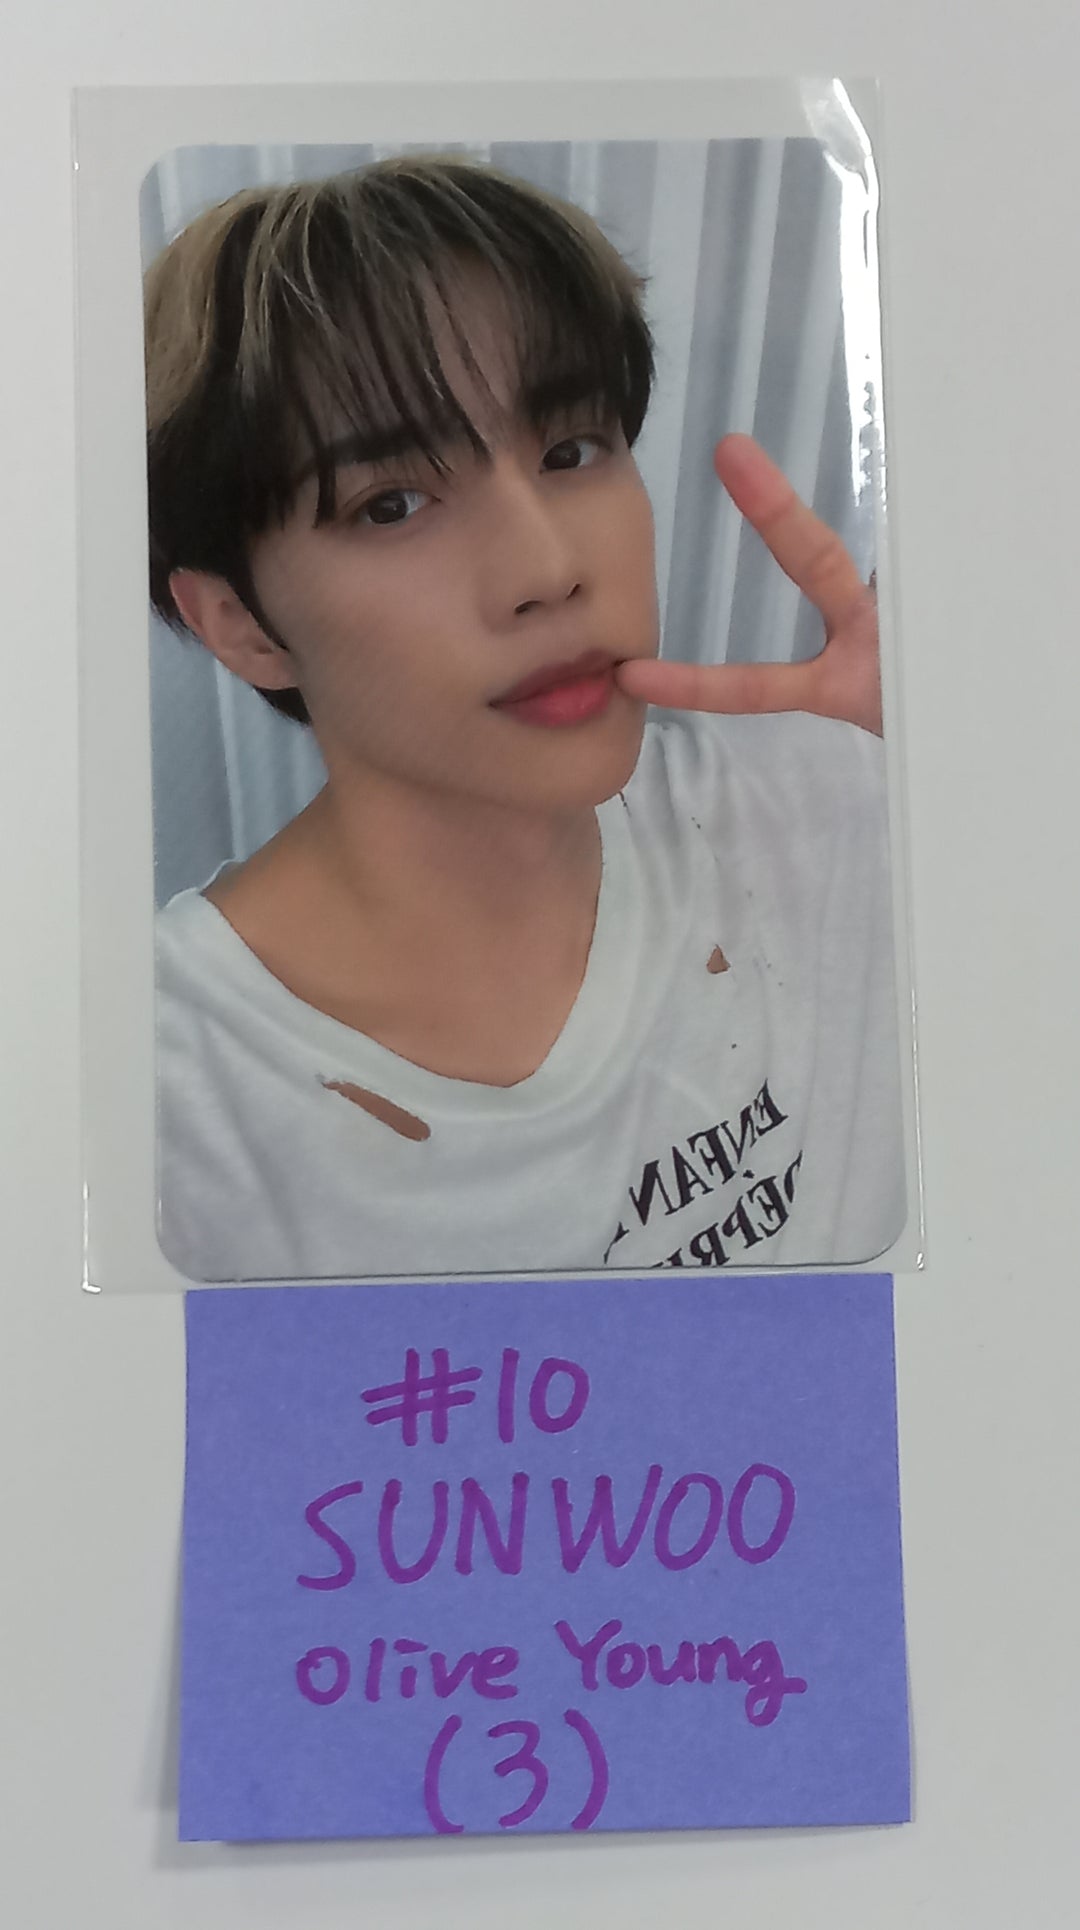 The Boyz ""PHANTASY" pt.1 Christmas in August - OLIVE YOUNG Special Gift Event Photocard [23.08.21]